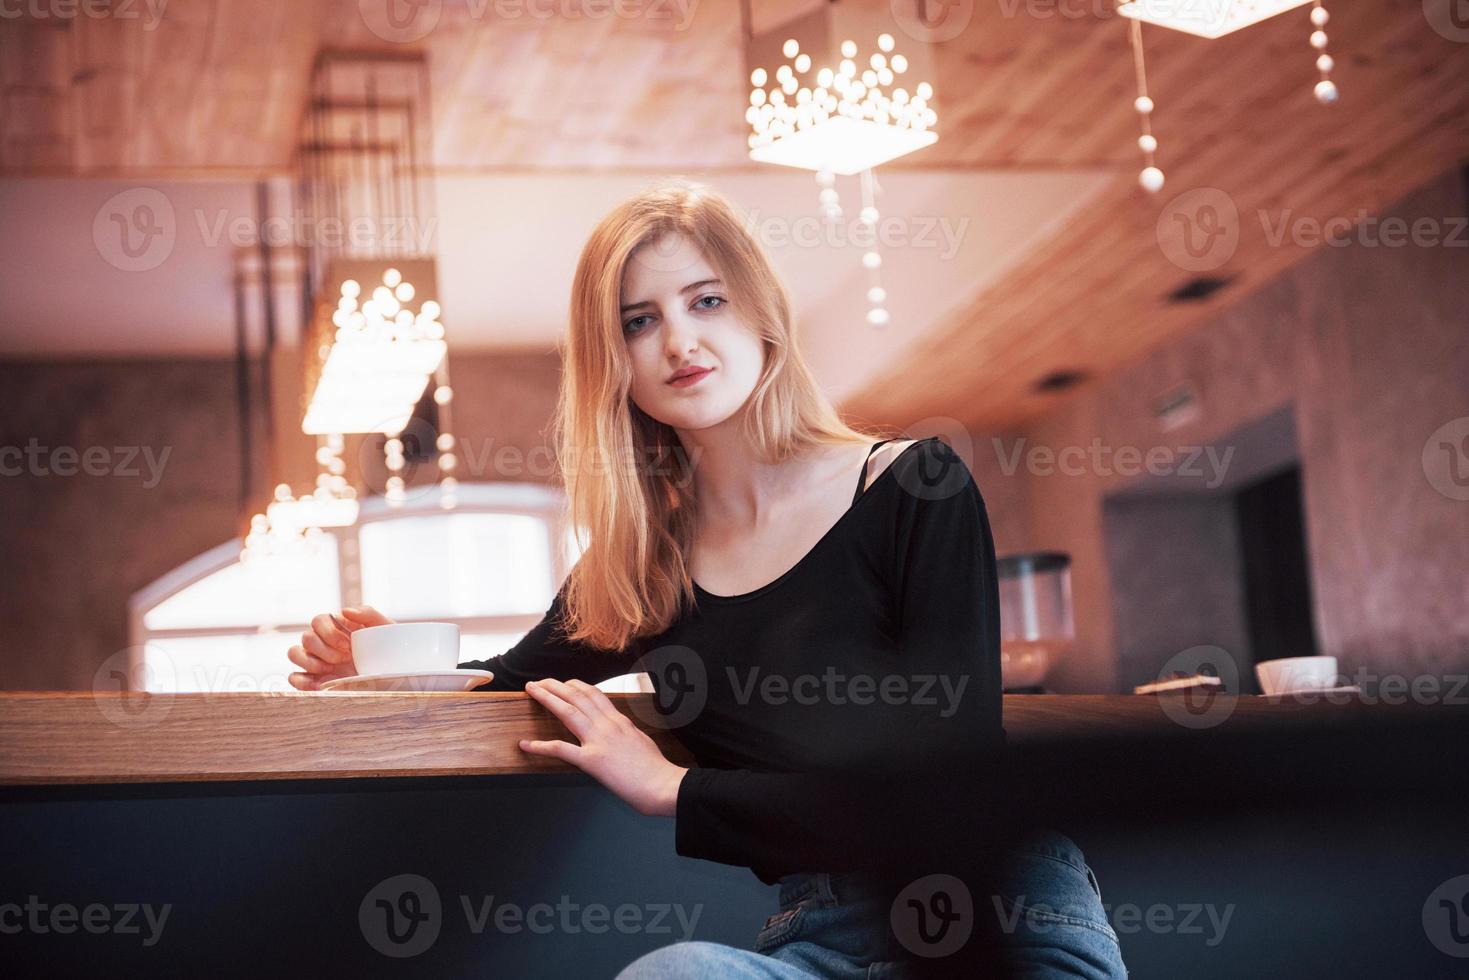 Happy smiling young woman using phone in a cafe. Beautiful girl in trendy spring colors photo